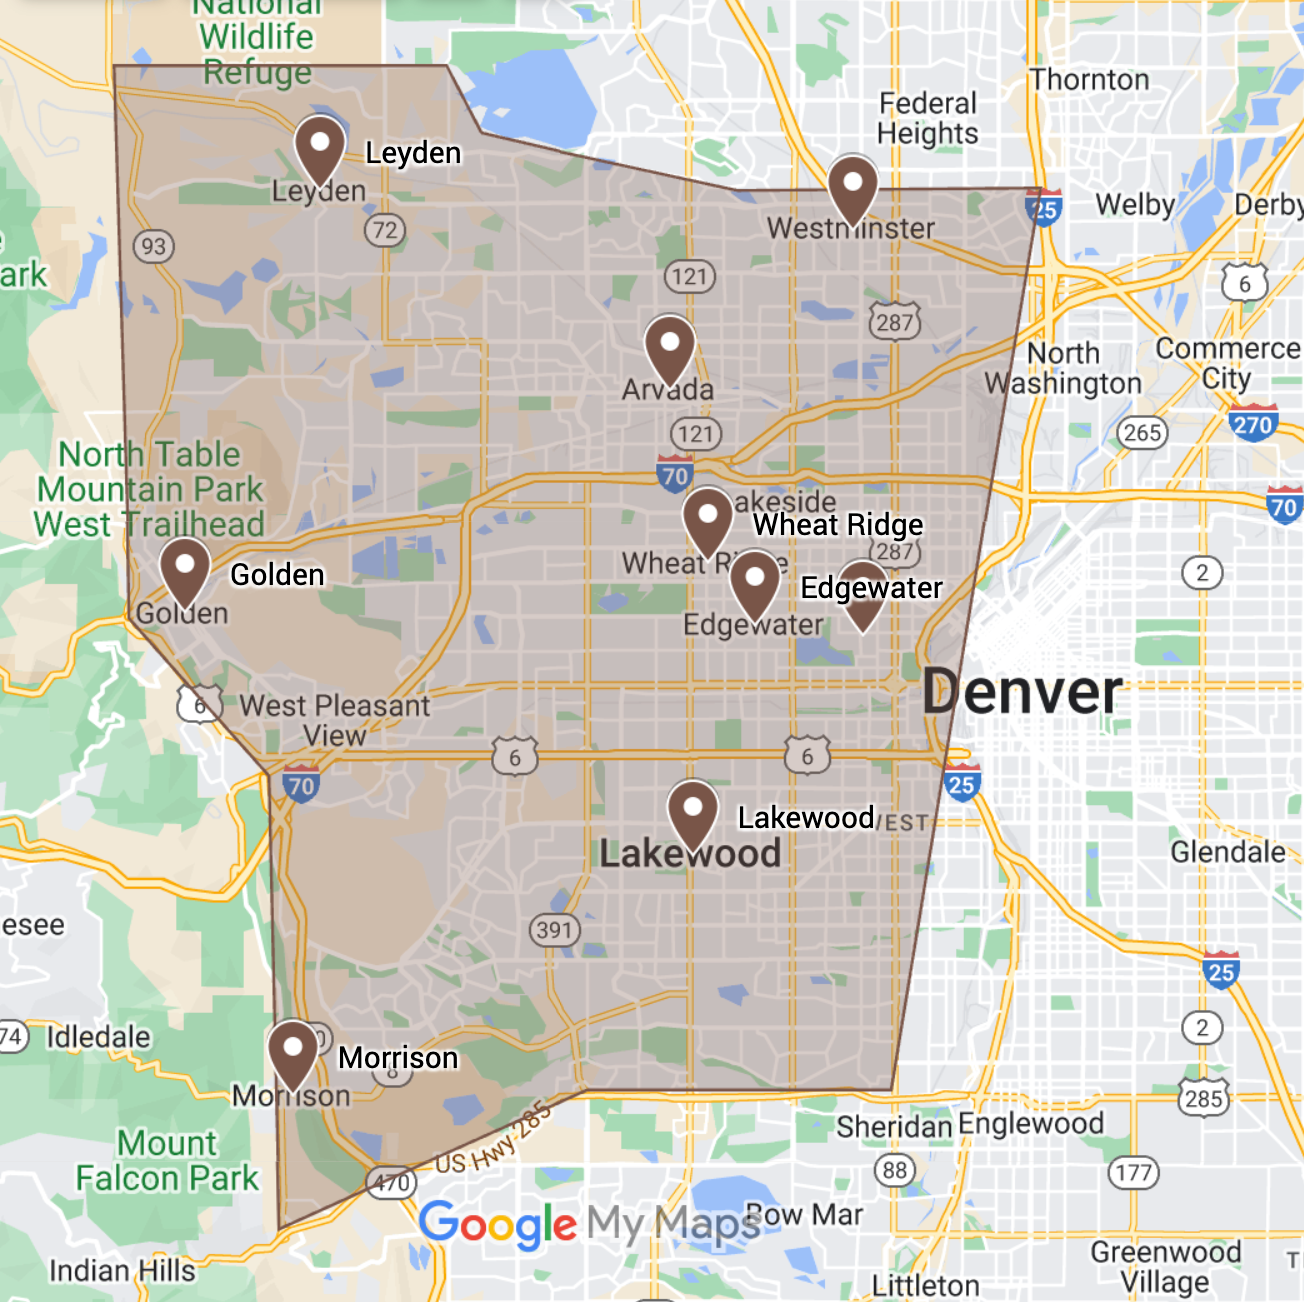 Dirt Cheap Compost service map - compost pickup service for Arvada, Wheat Ridge, Lakewood, Golden, Leyden, Westminster, Sloan's Lake, Edgewater, and parts of the Denver Highlands. Updated April 2024